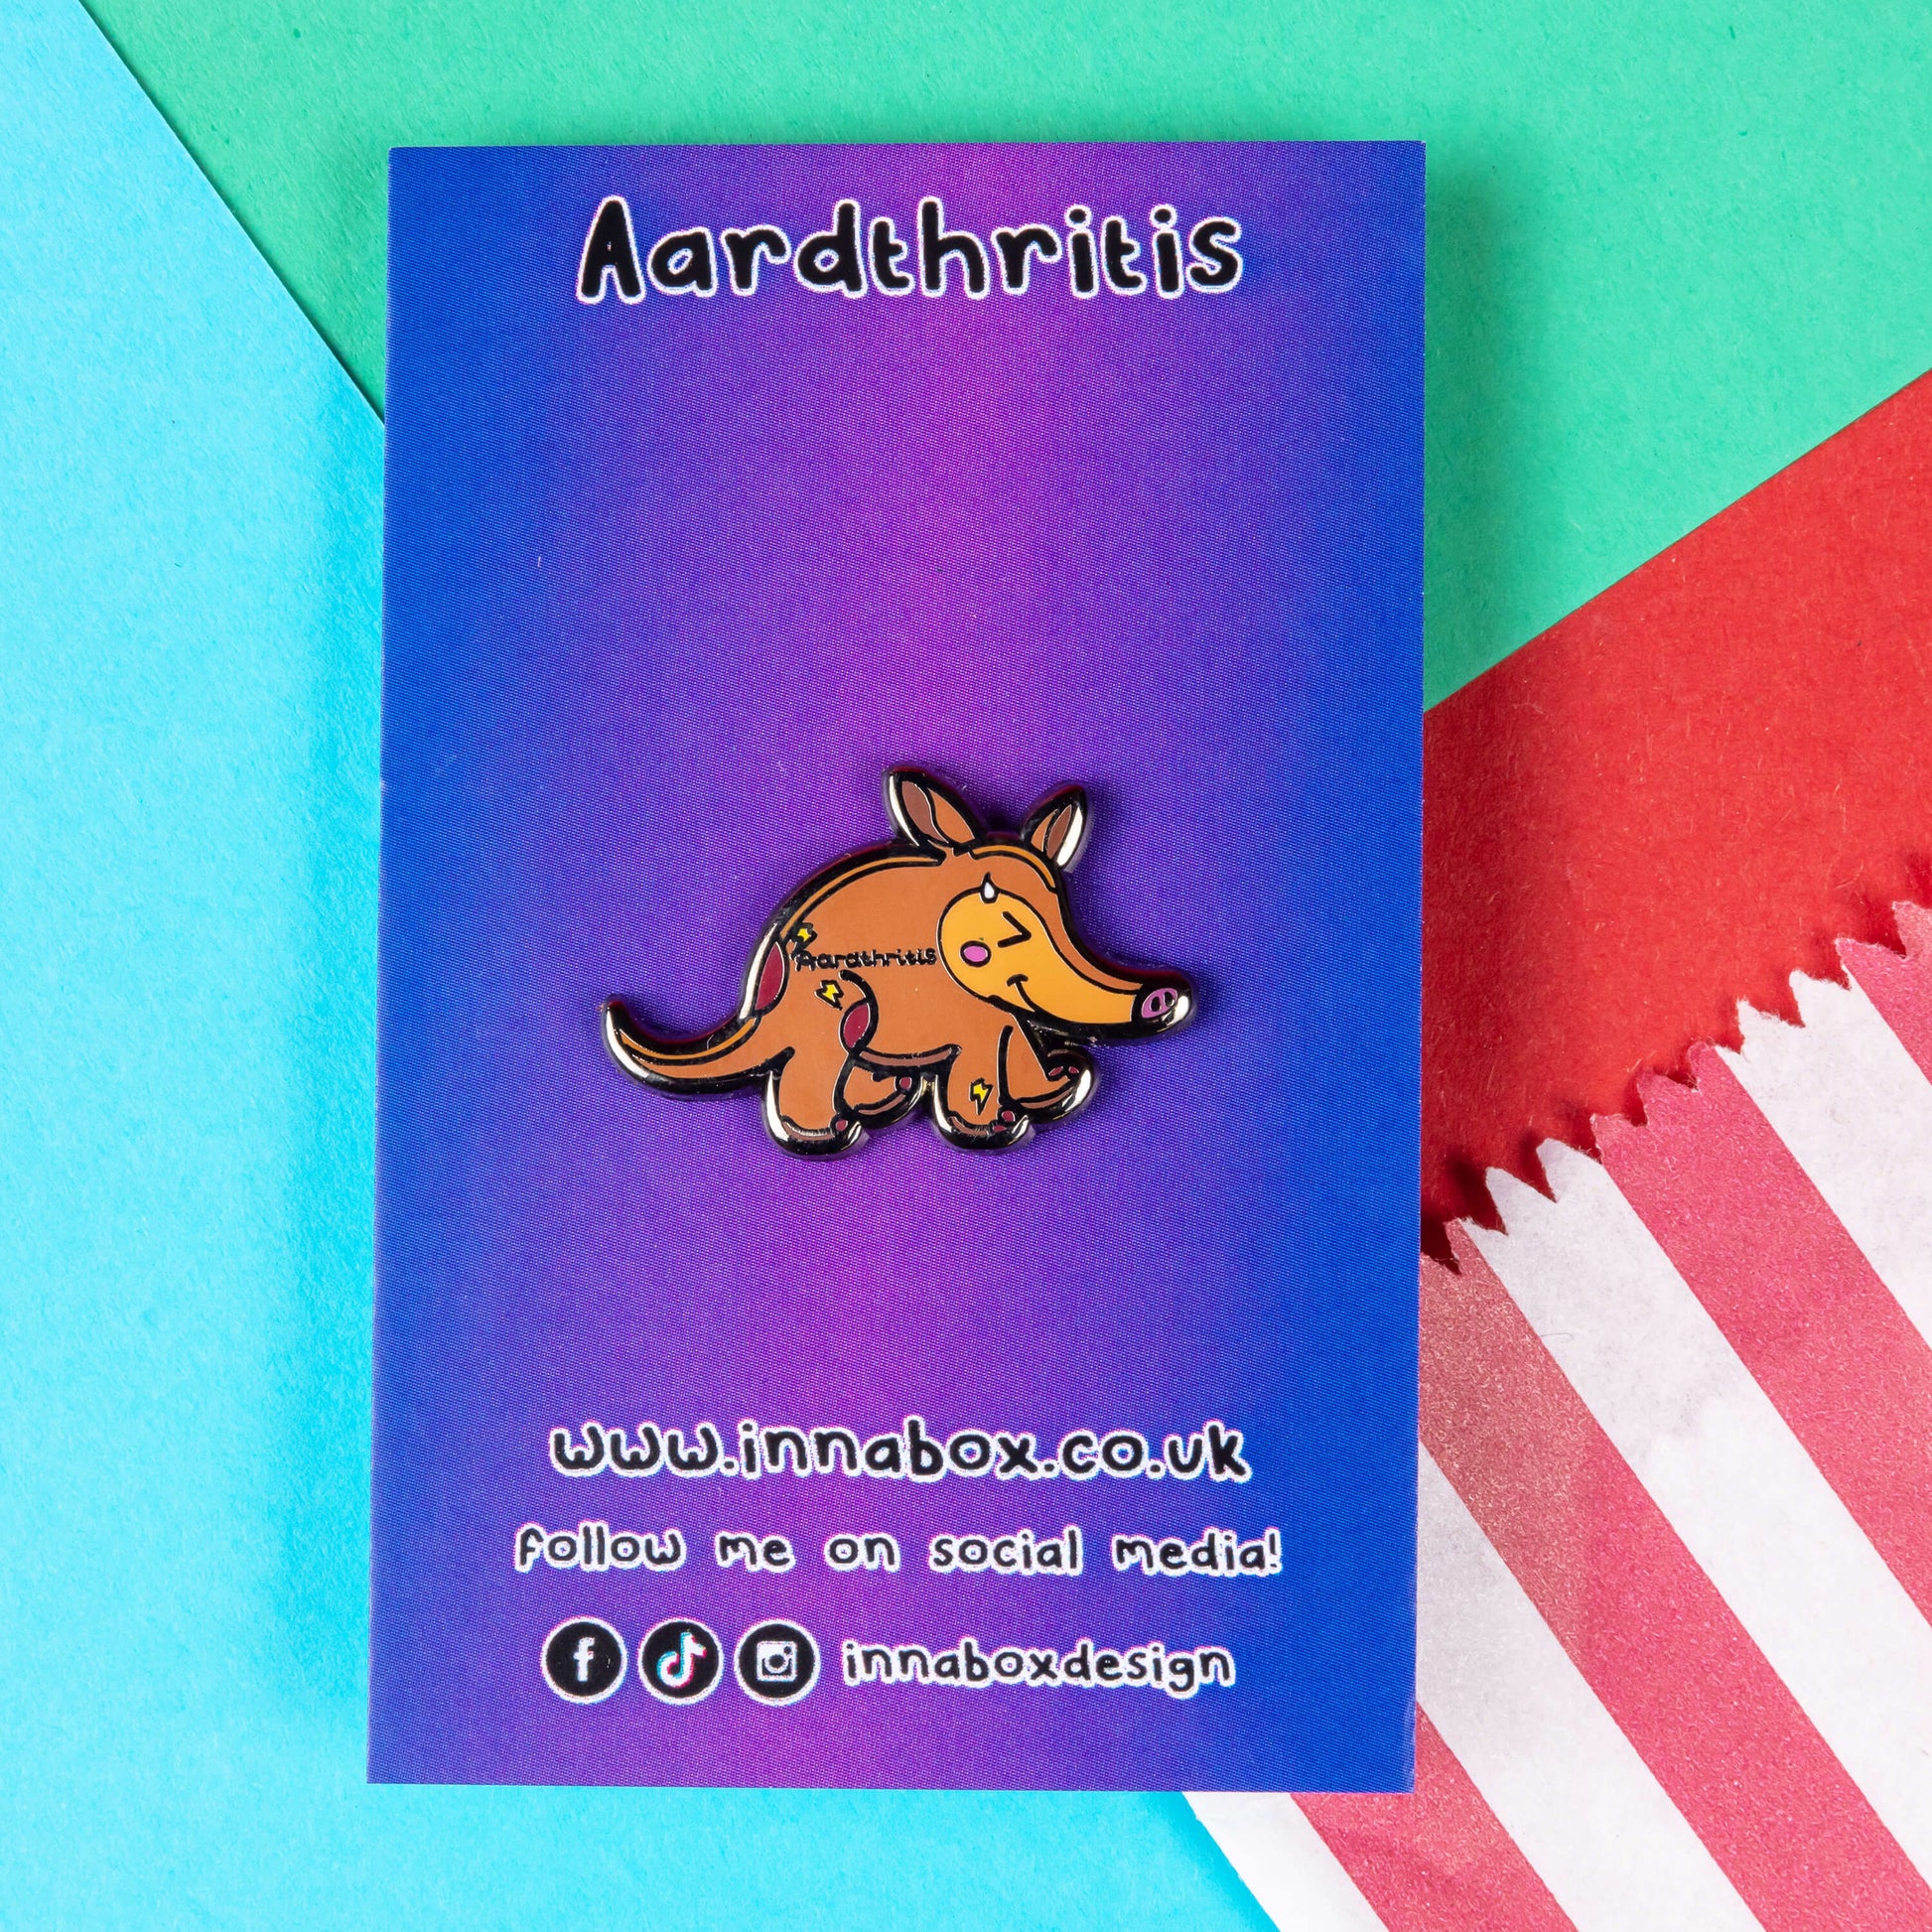 The Aardthritis Aardvark Enamel Pin - Arthritis on purple and blue gradient backing card with black text. The smiling sweating brown aardvark with pink cheeks and lightning bolts scattered across its body with black text reading 'aardthritis'. The hand drawn design is raising awareness for arthritis, Osteoarthritis and Rheumatoid arthritis.